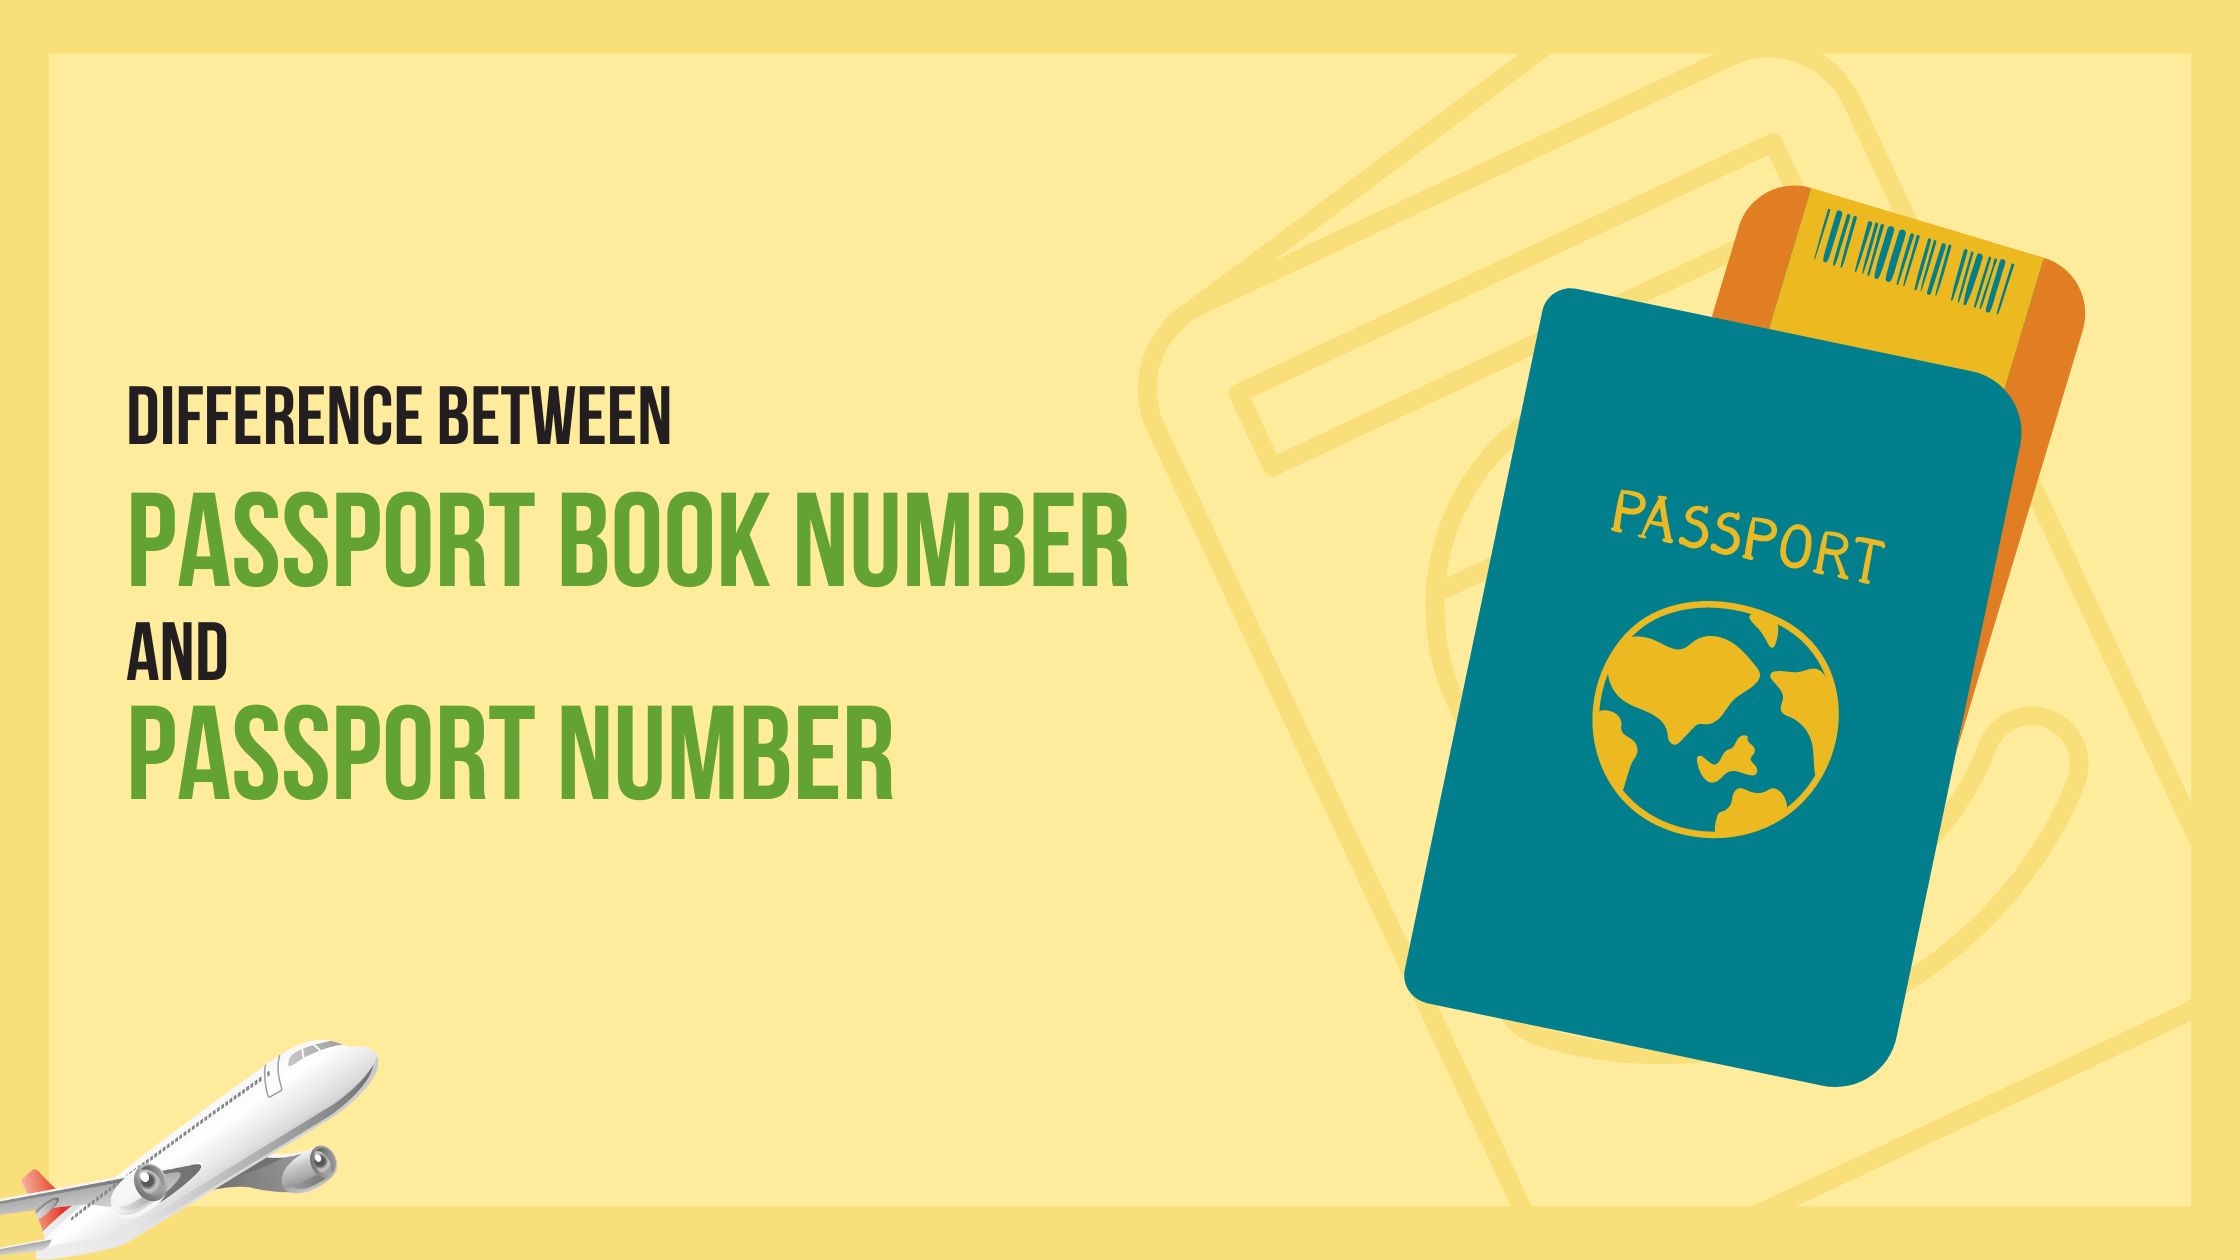 Difference Between Passport Book Number And Passport Number